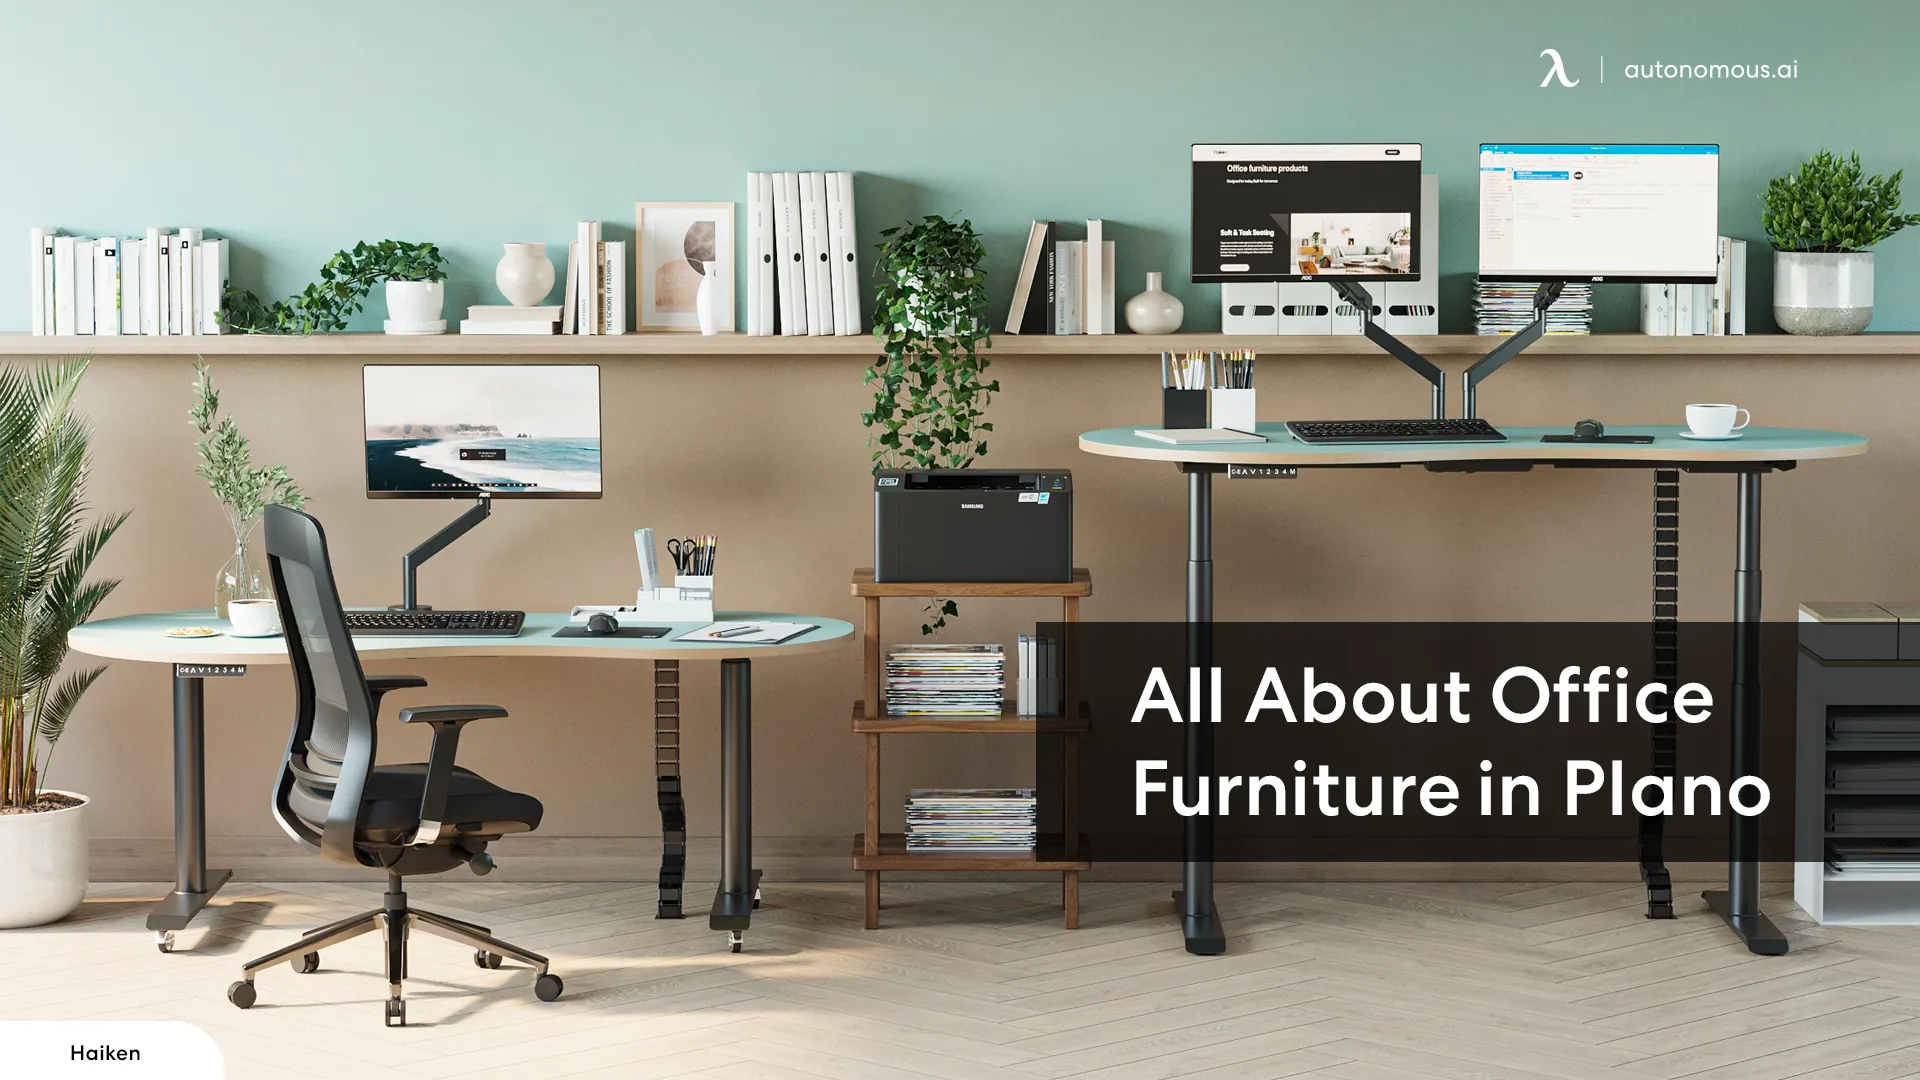 Enhancing Workspaces: Office Furniture Ideas for Productivity in Plano